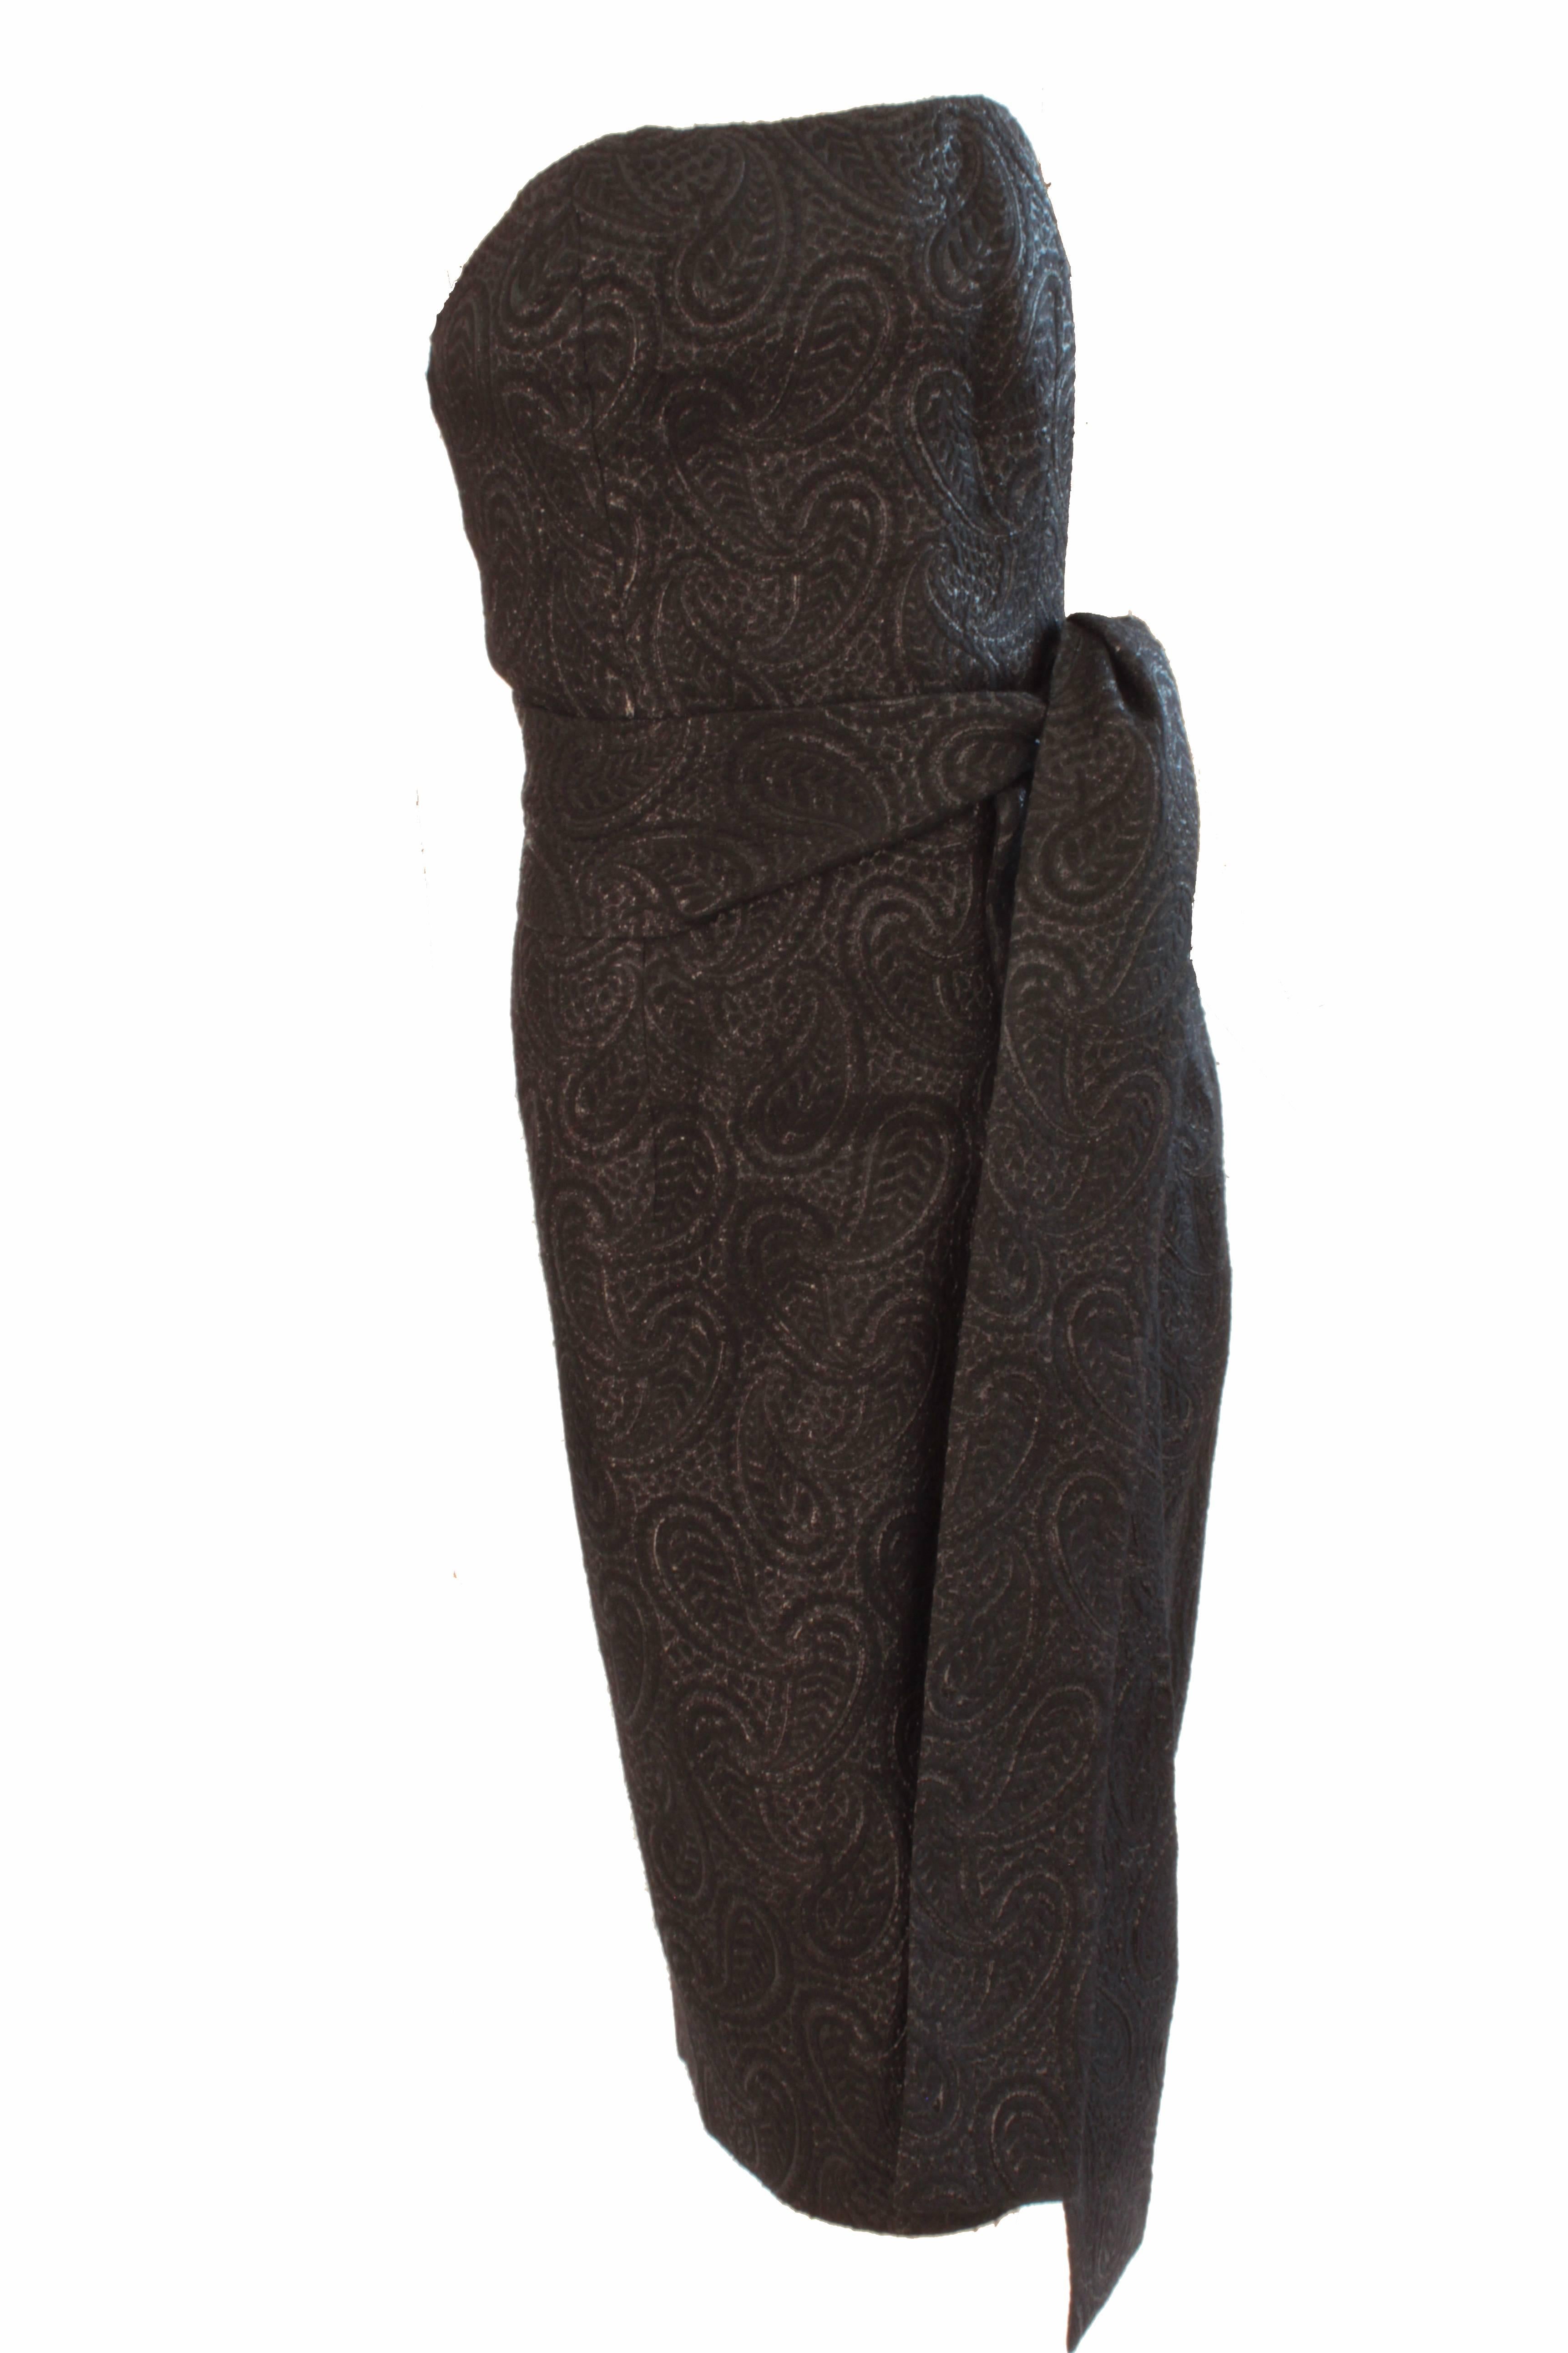 This sparkling little black dress was made by Givenchy, most likely in the late 1960s.  Made from a silk, wool and lurex blend fabric, it features a paisley motif throughout and comes with a matching thick wrap belt or scarf.  Fully-lined, it